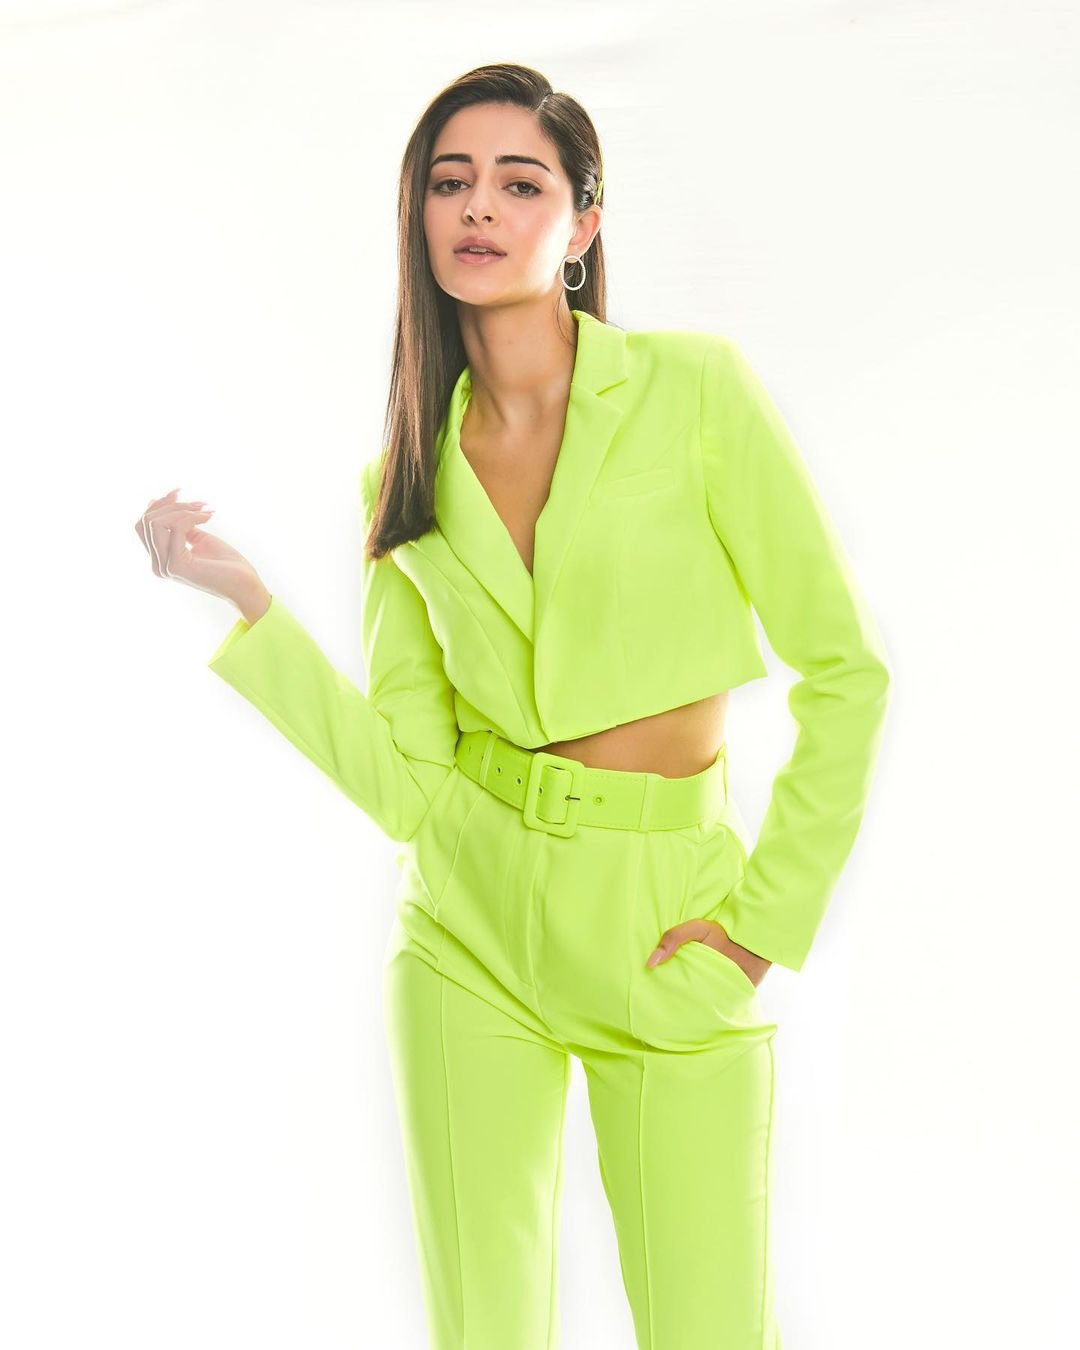 Ananya Panday’s love for bright colours